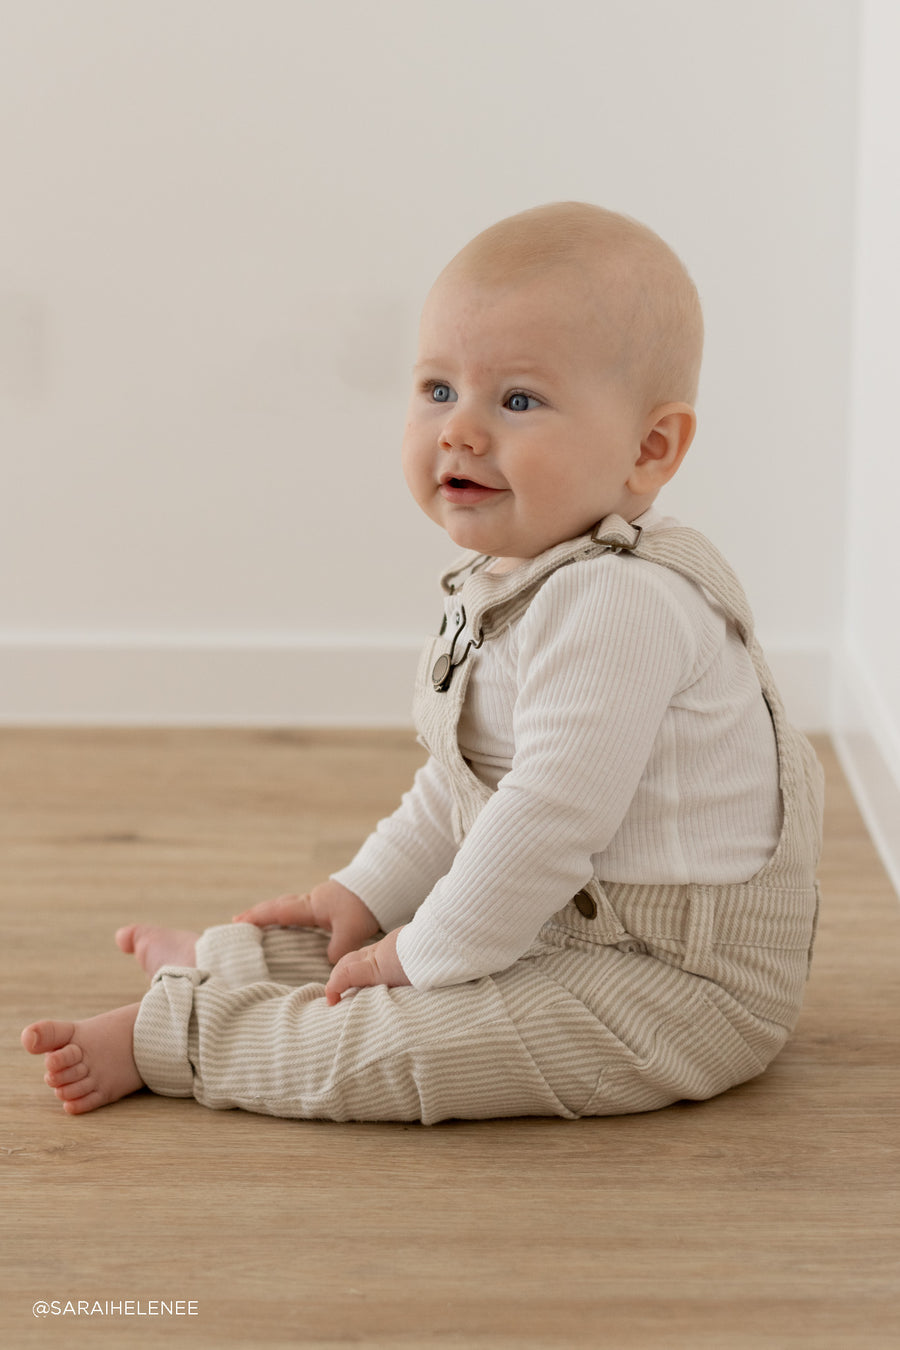 Arlo Twill Overall - Soft Clay/Stucco Stripe Childrens Overall from Jamie Kay USA